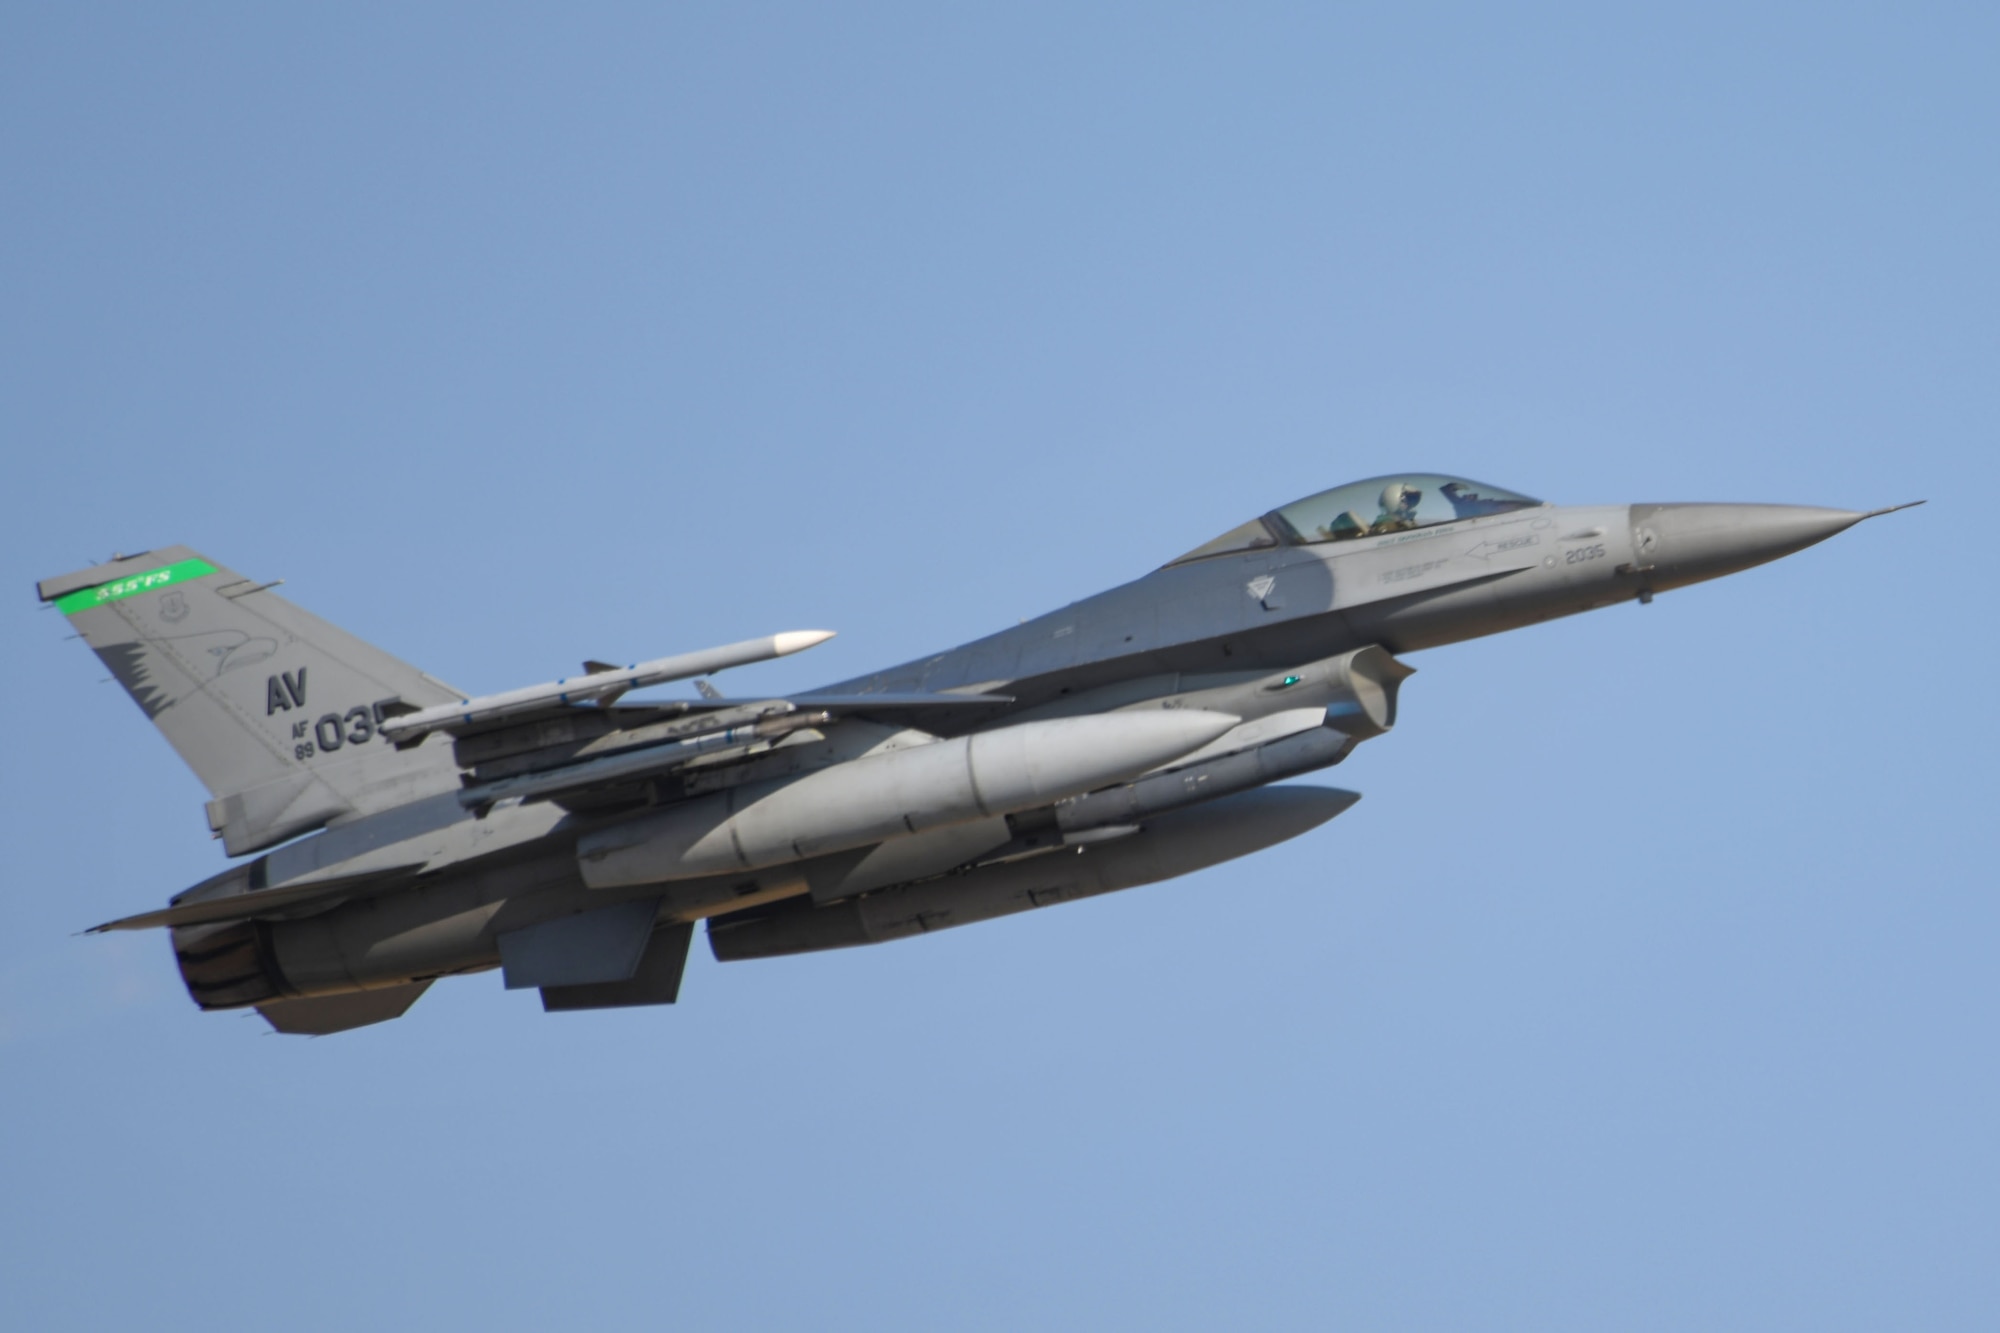 A U.S. Air Force F-16 Fighting Falcon assigned to the 555th Fighter Squadron, Aviano Air Base, Italy, participates in exercise Thracian Viper 20 at Graf Ignatievo Air Base, Bulgaria, Sept. 23, 2020. Thracian Viper 20 is a multilateral training exercise with the Bulgarian air force, aimed to increase operational capacity, capability and interoperability with Bulgaria. Exercises like this enhance their ability to rapidly deploy to a remote location, establish command and control and deliver lethal airpower more effectively and efficiently anywhere in the world. (U.S. Air Force photo by Airman 1st Class Ericka A. Woolever)